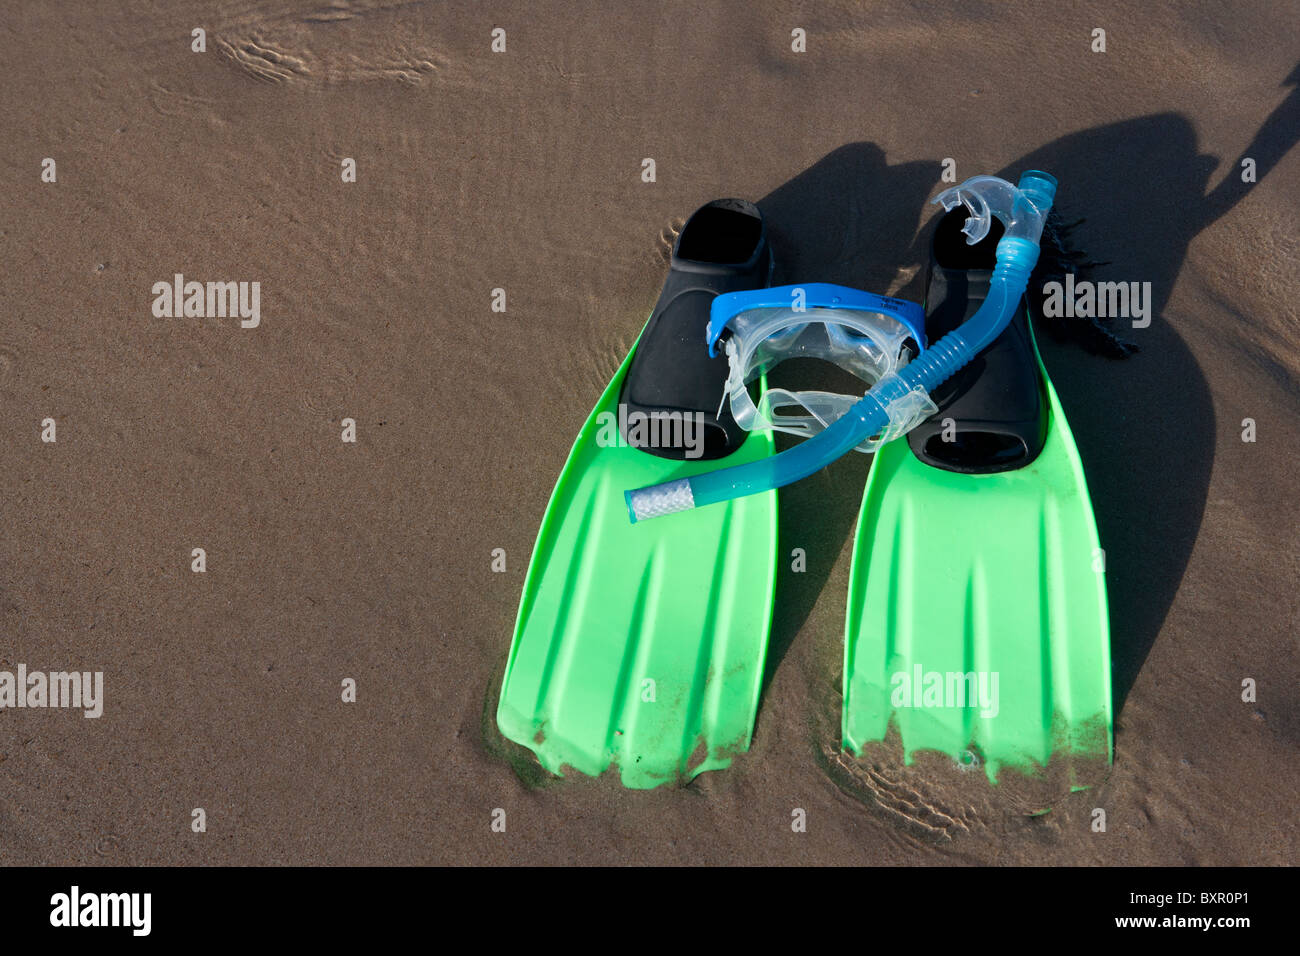 Snorkeling equipment (snorkel, mask and flippers) lying in wait on sandy beach. Stock Photo